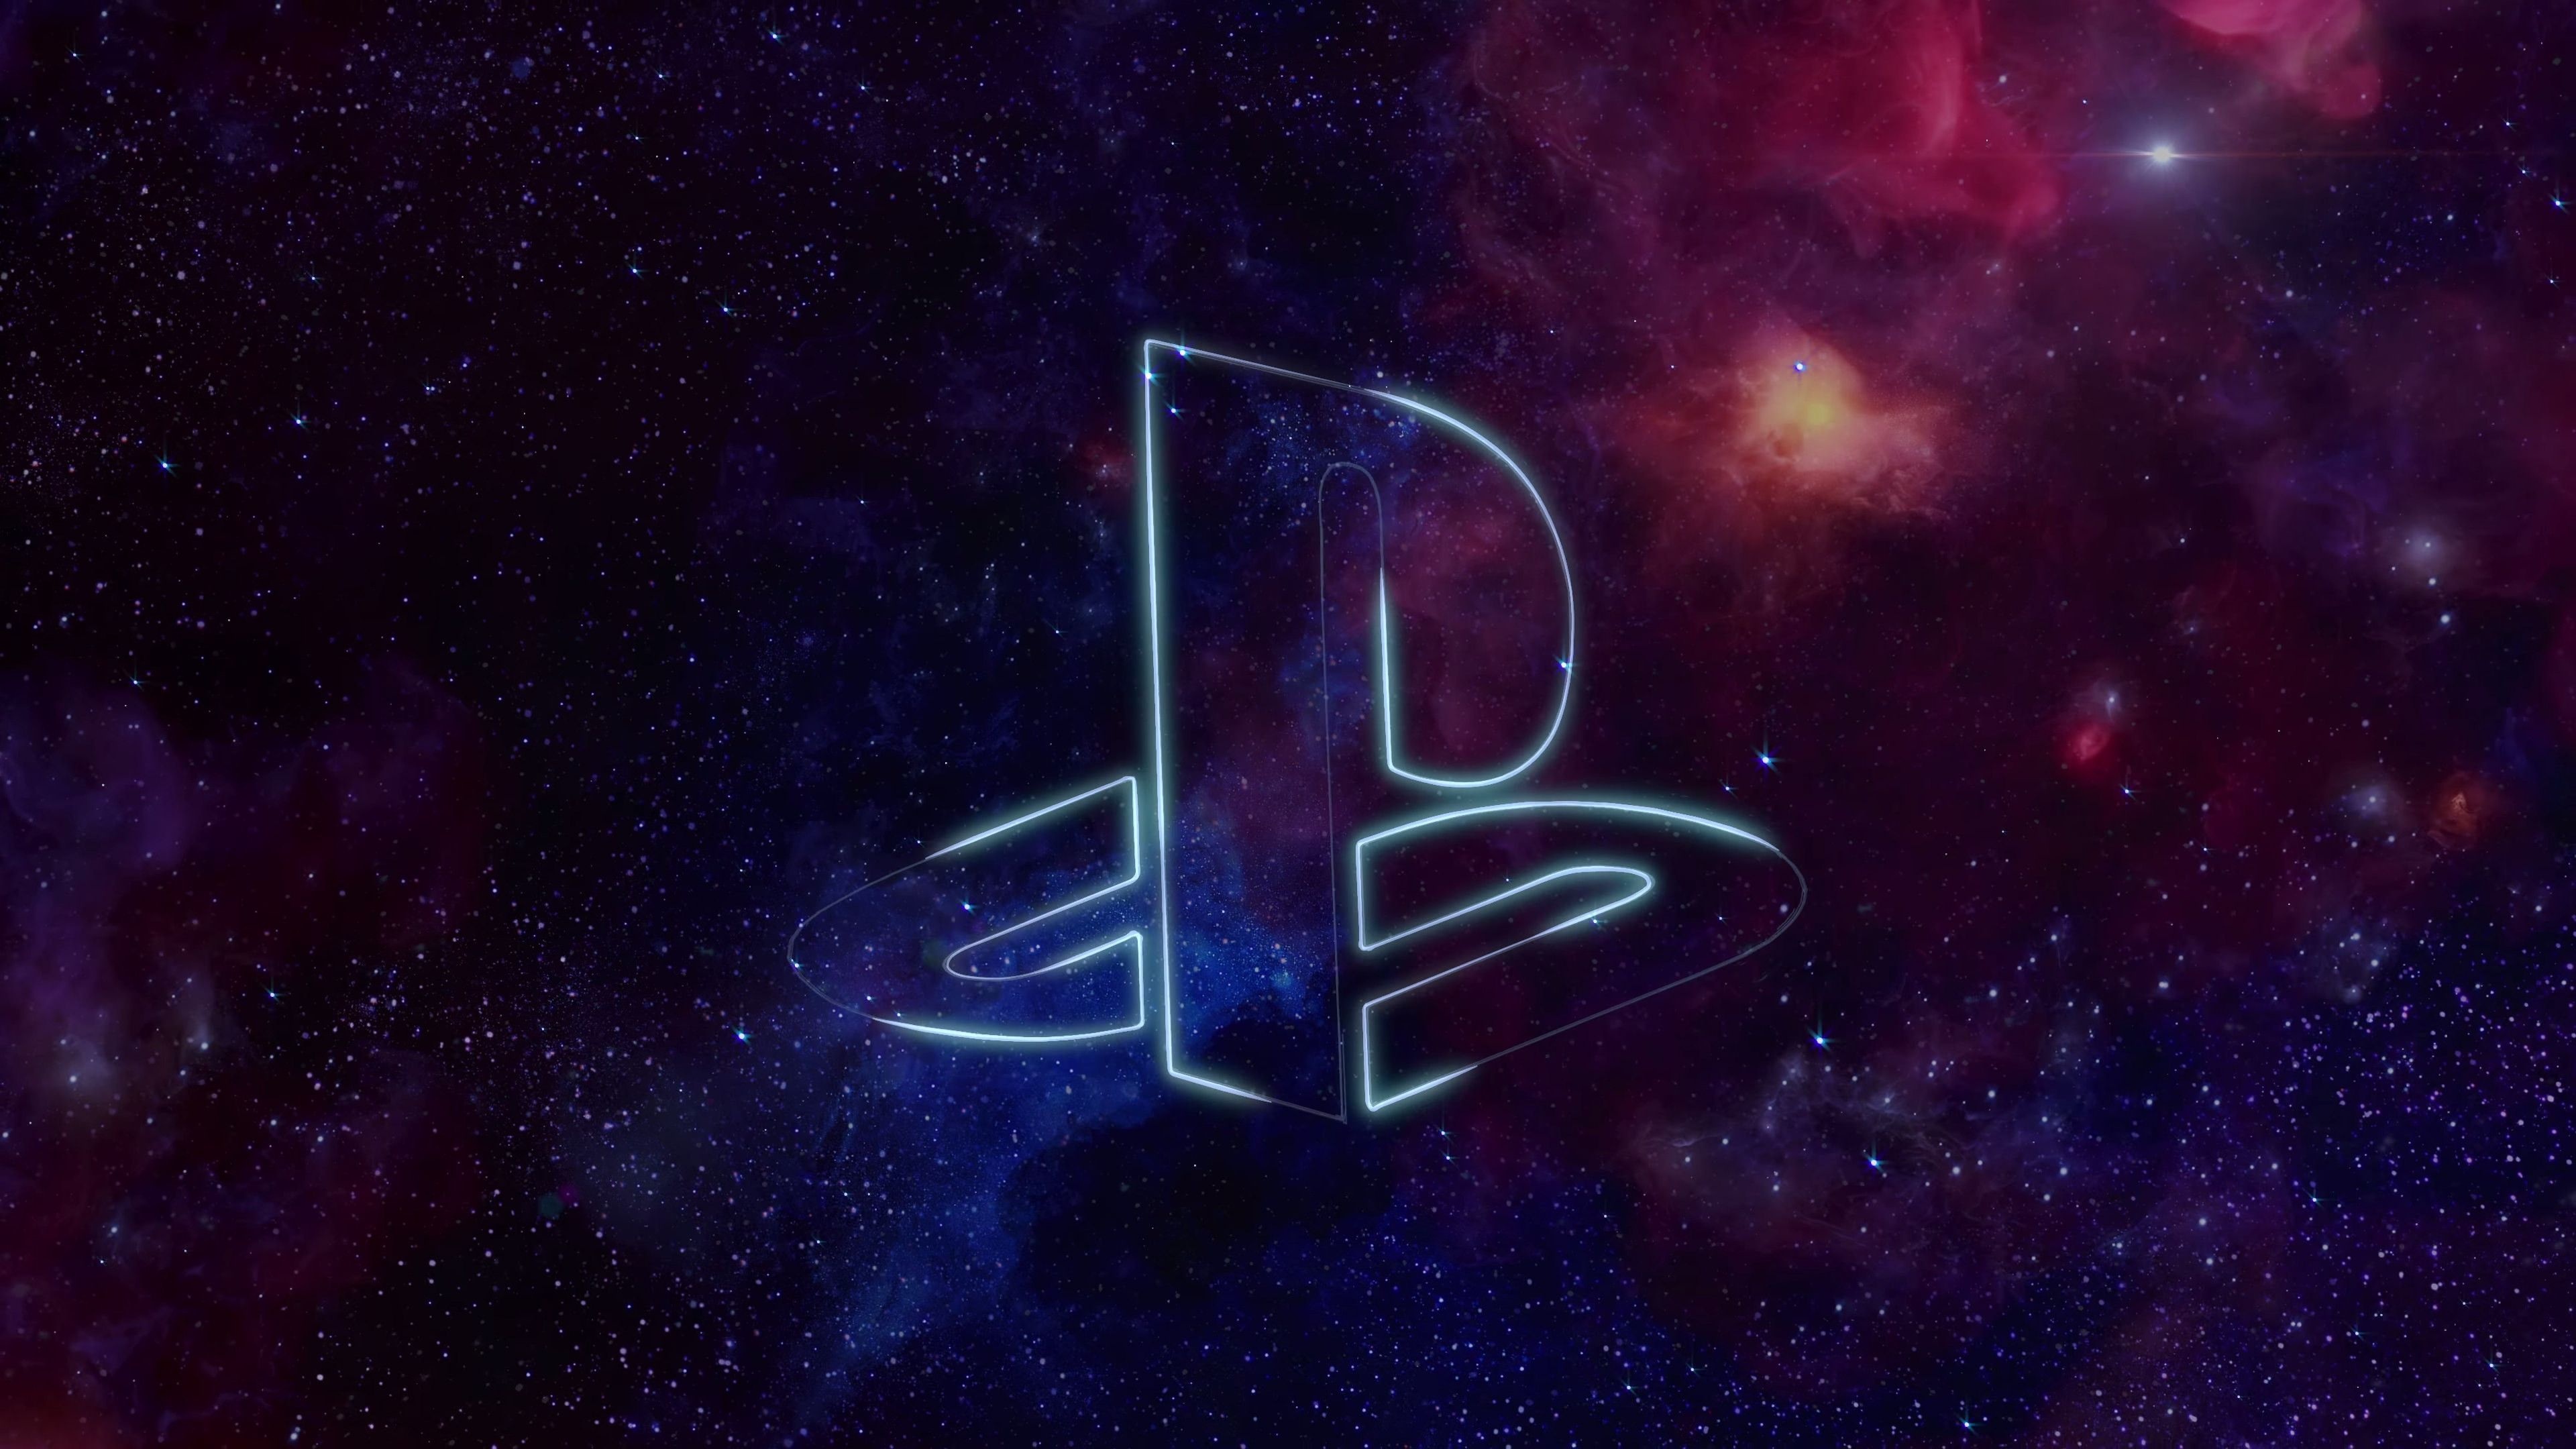 The PlayStation, PS4 wallpapers, Console gaming, Gaming graphics, 3840x2160 4K Desktop